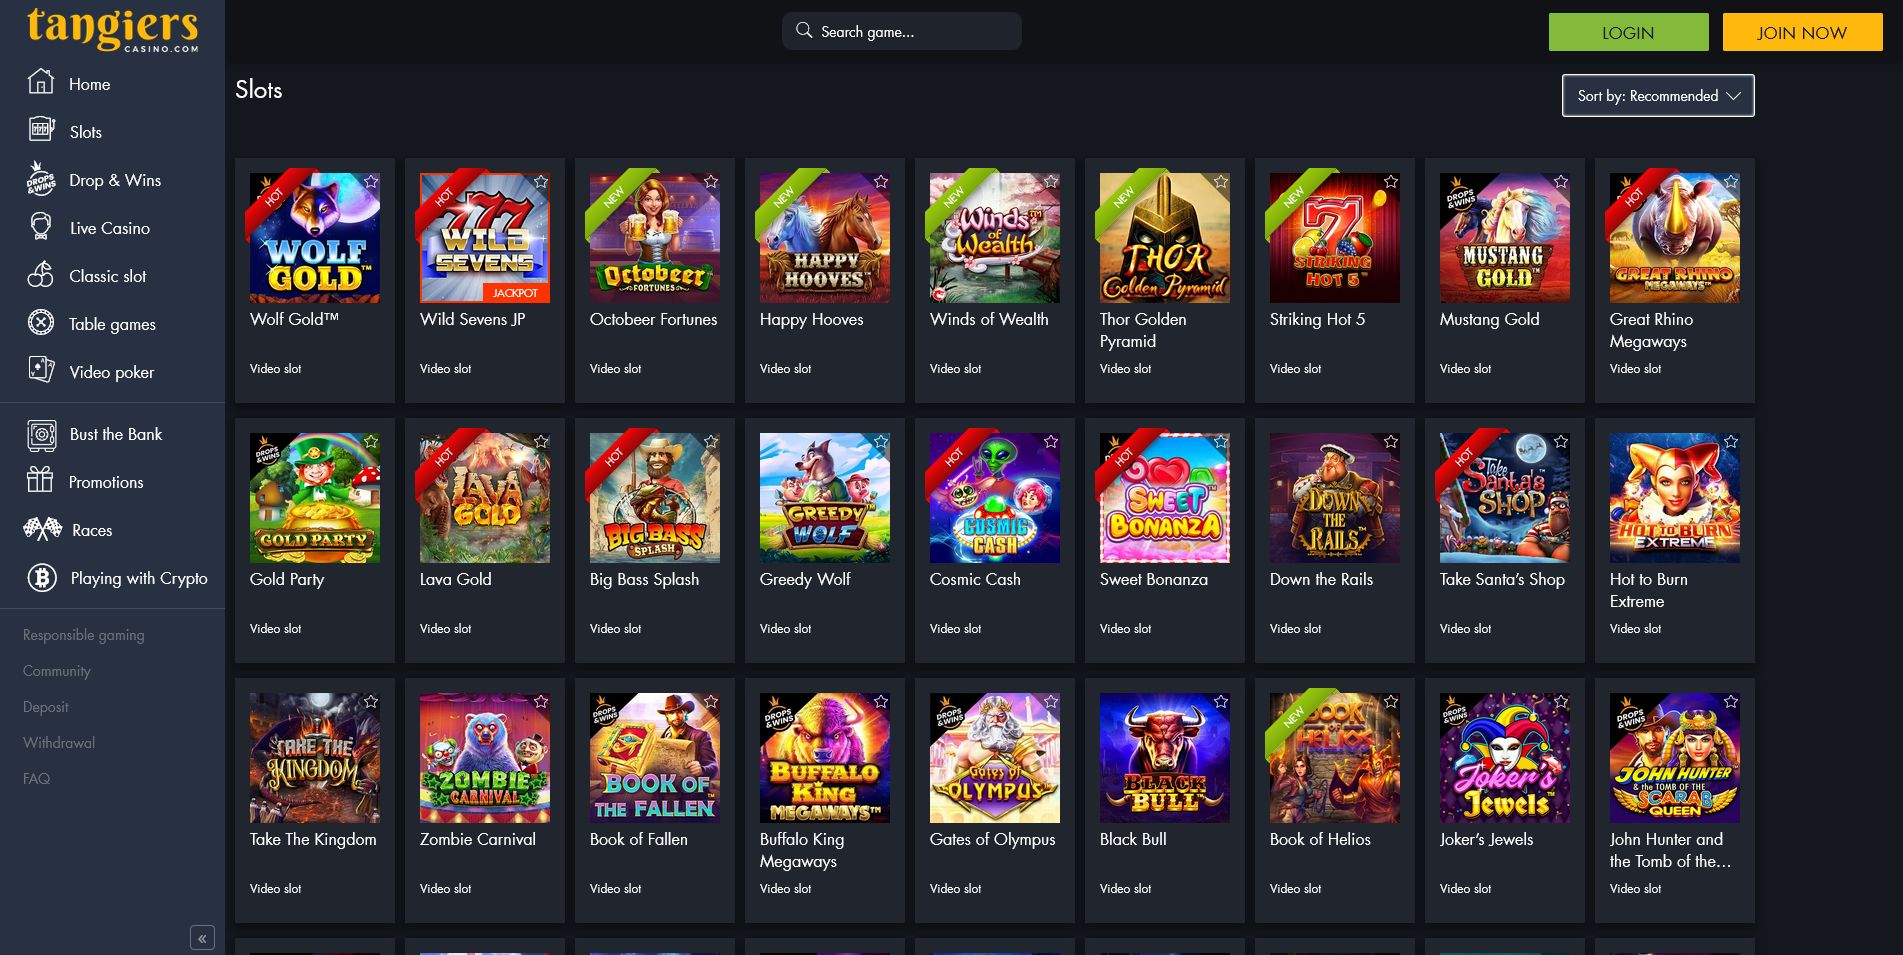 Screenshot of the Tangiers Casino Game section